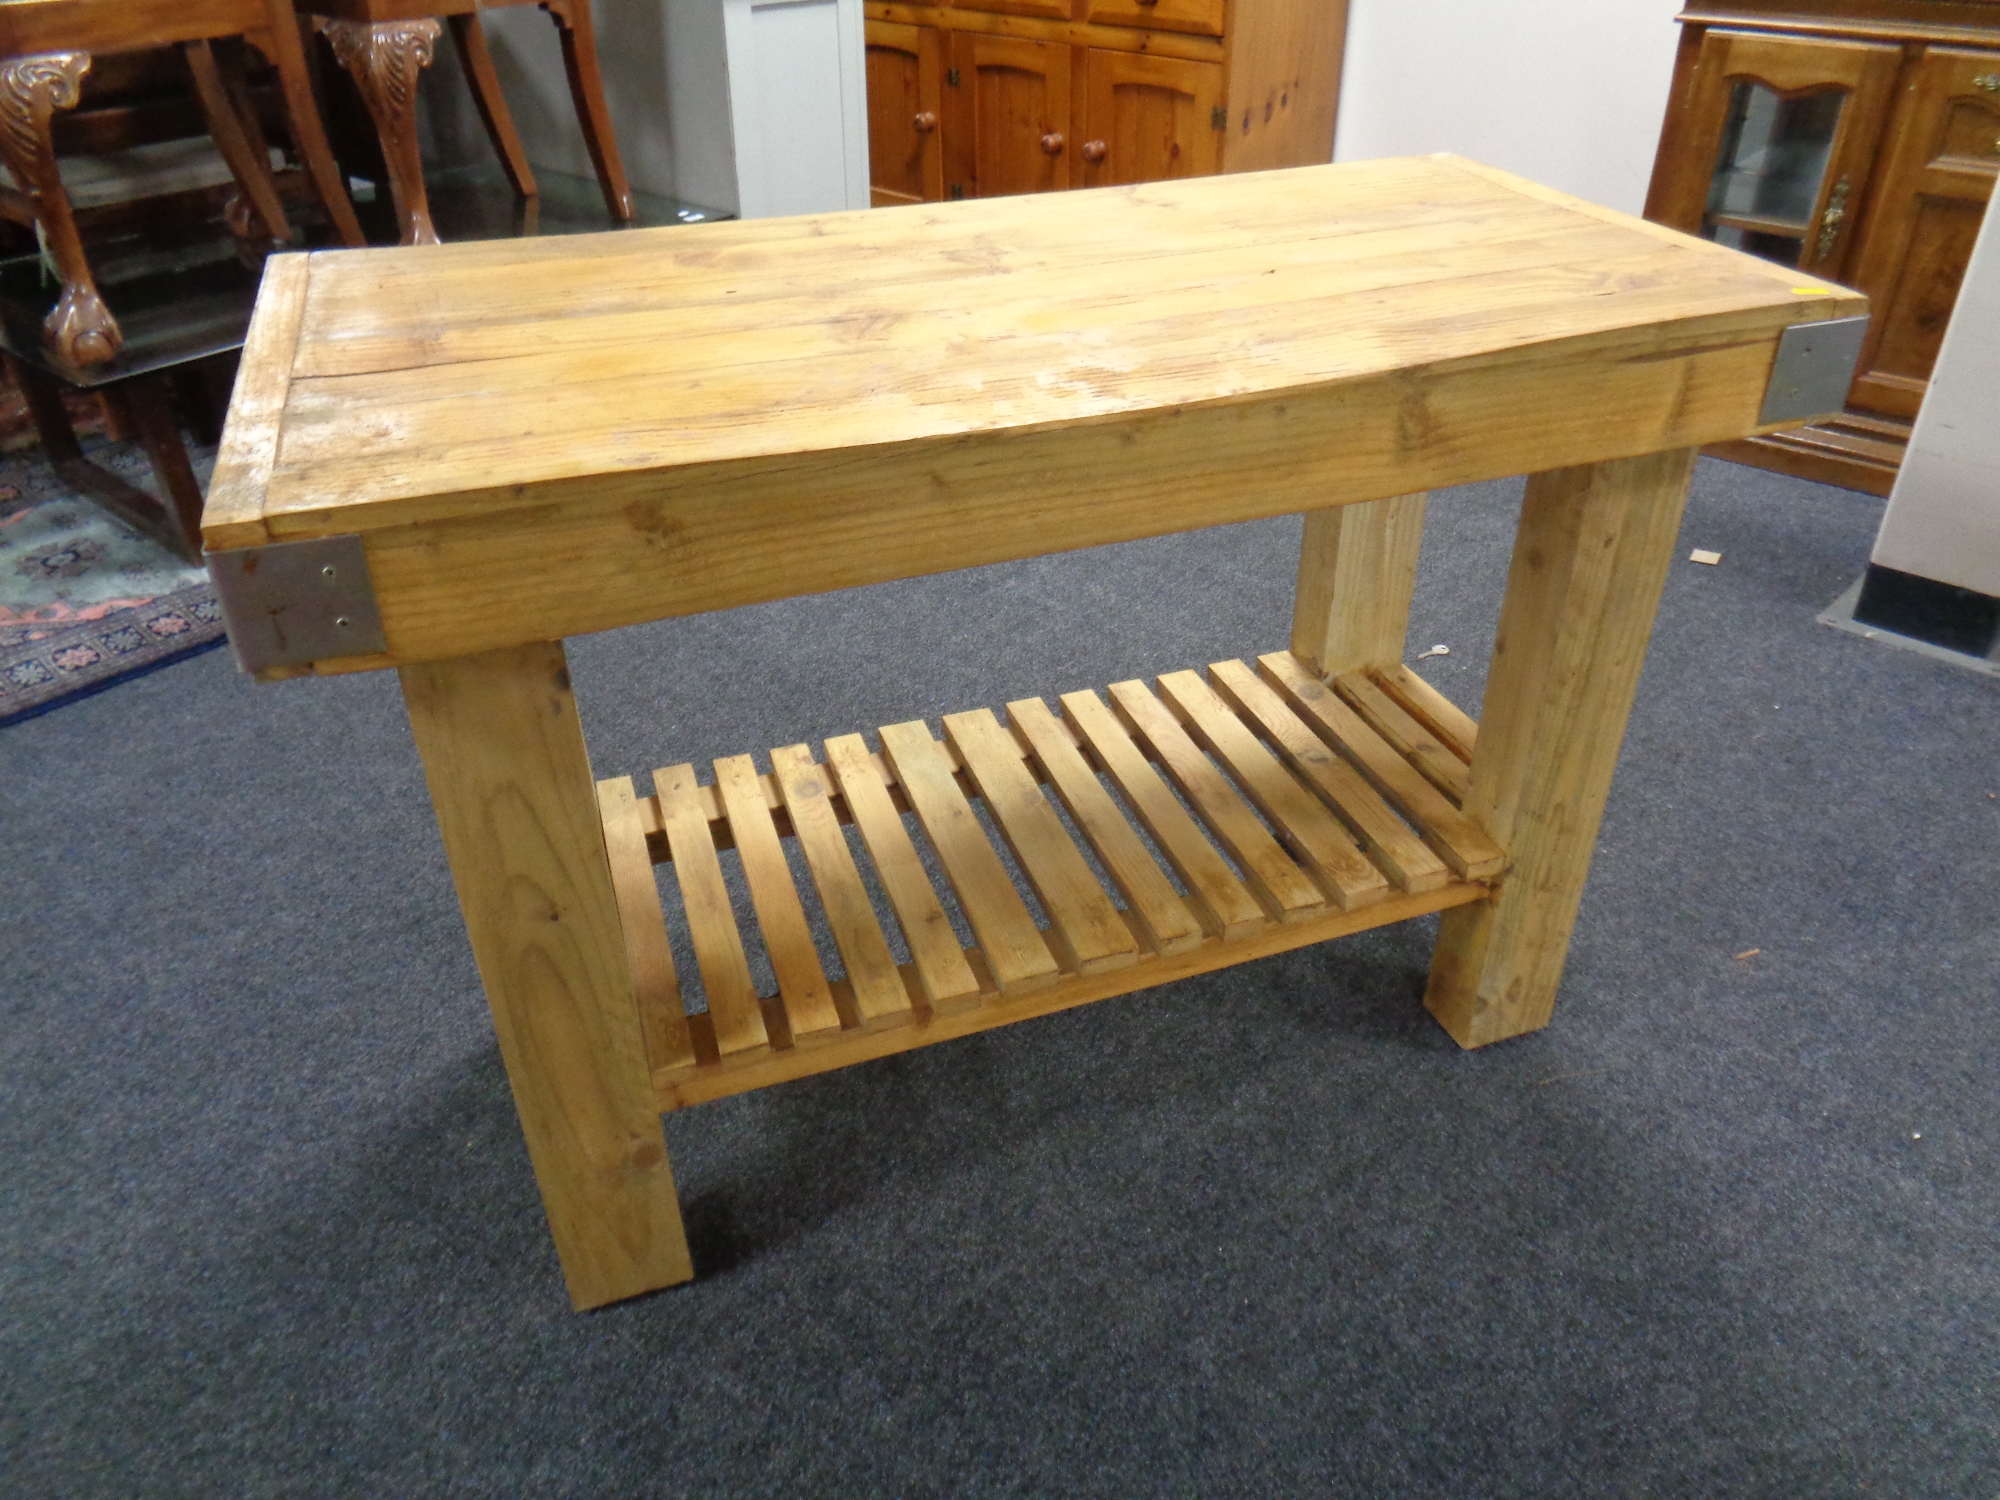 A reclaimed pine butcher's block kitchen table with undershelf.